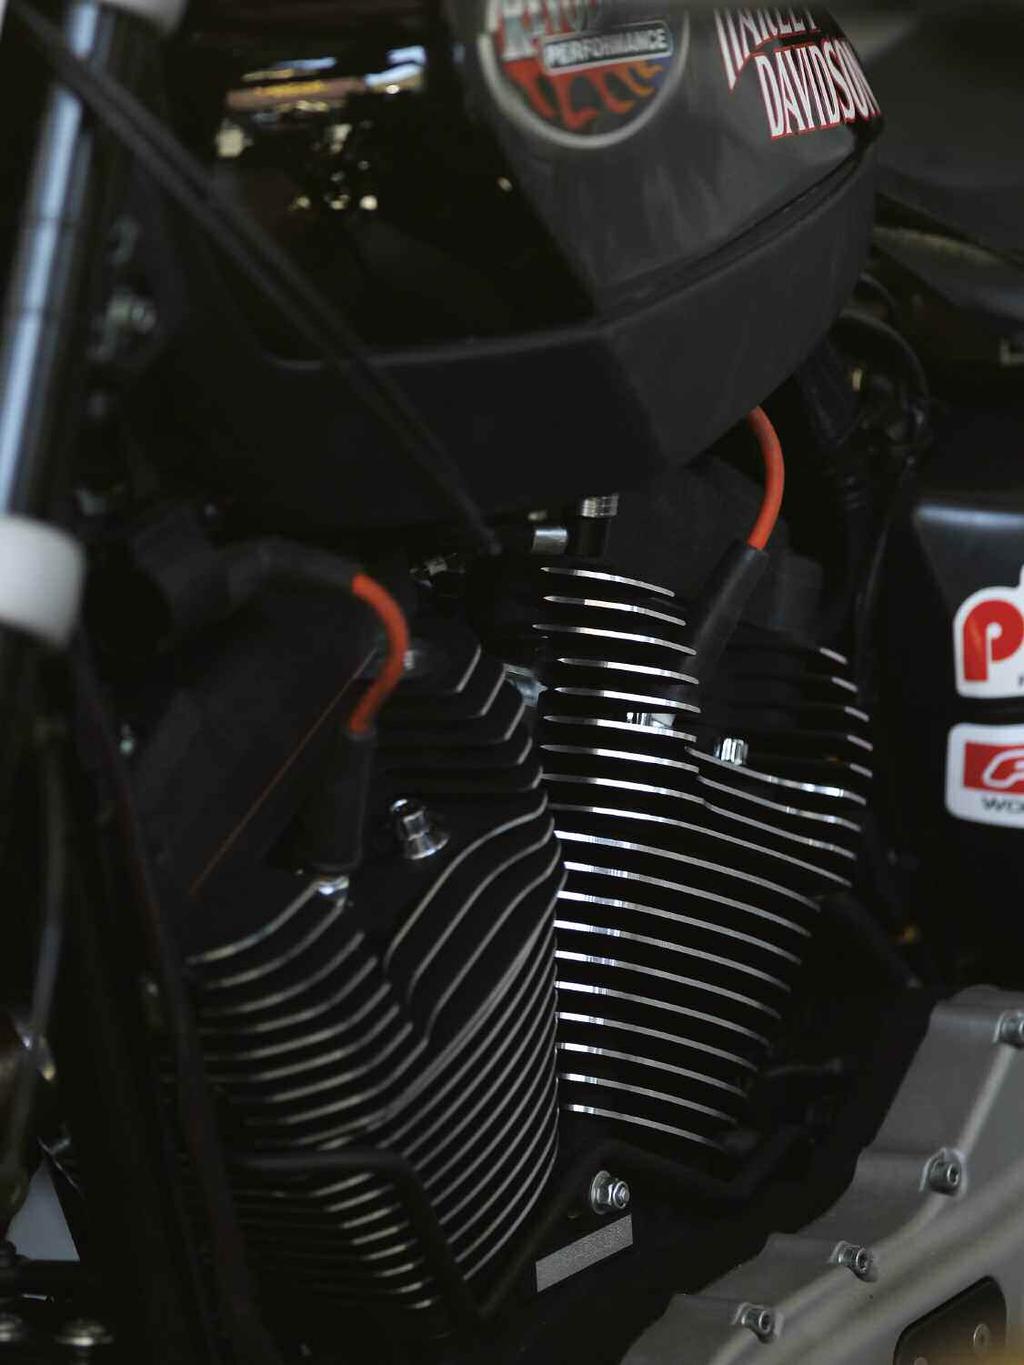 HARLEY- DAVIDSON XR1200 RACING TECH The rules that are in place for the AMA Pro Road Racing Vance & Hines XR1200 series differ slightly from the other AMA Pro Racing classes.